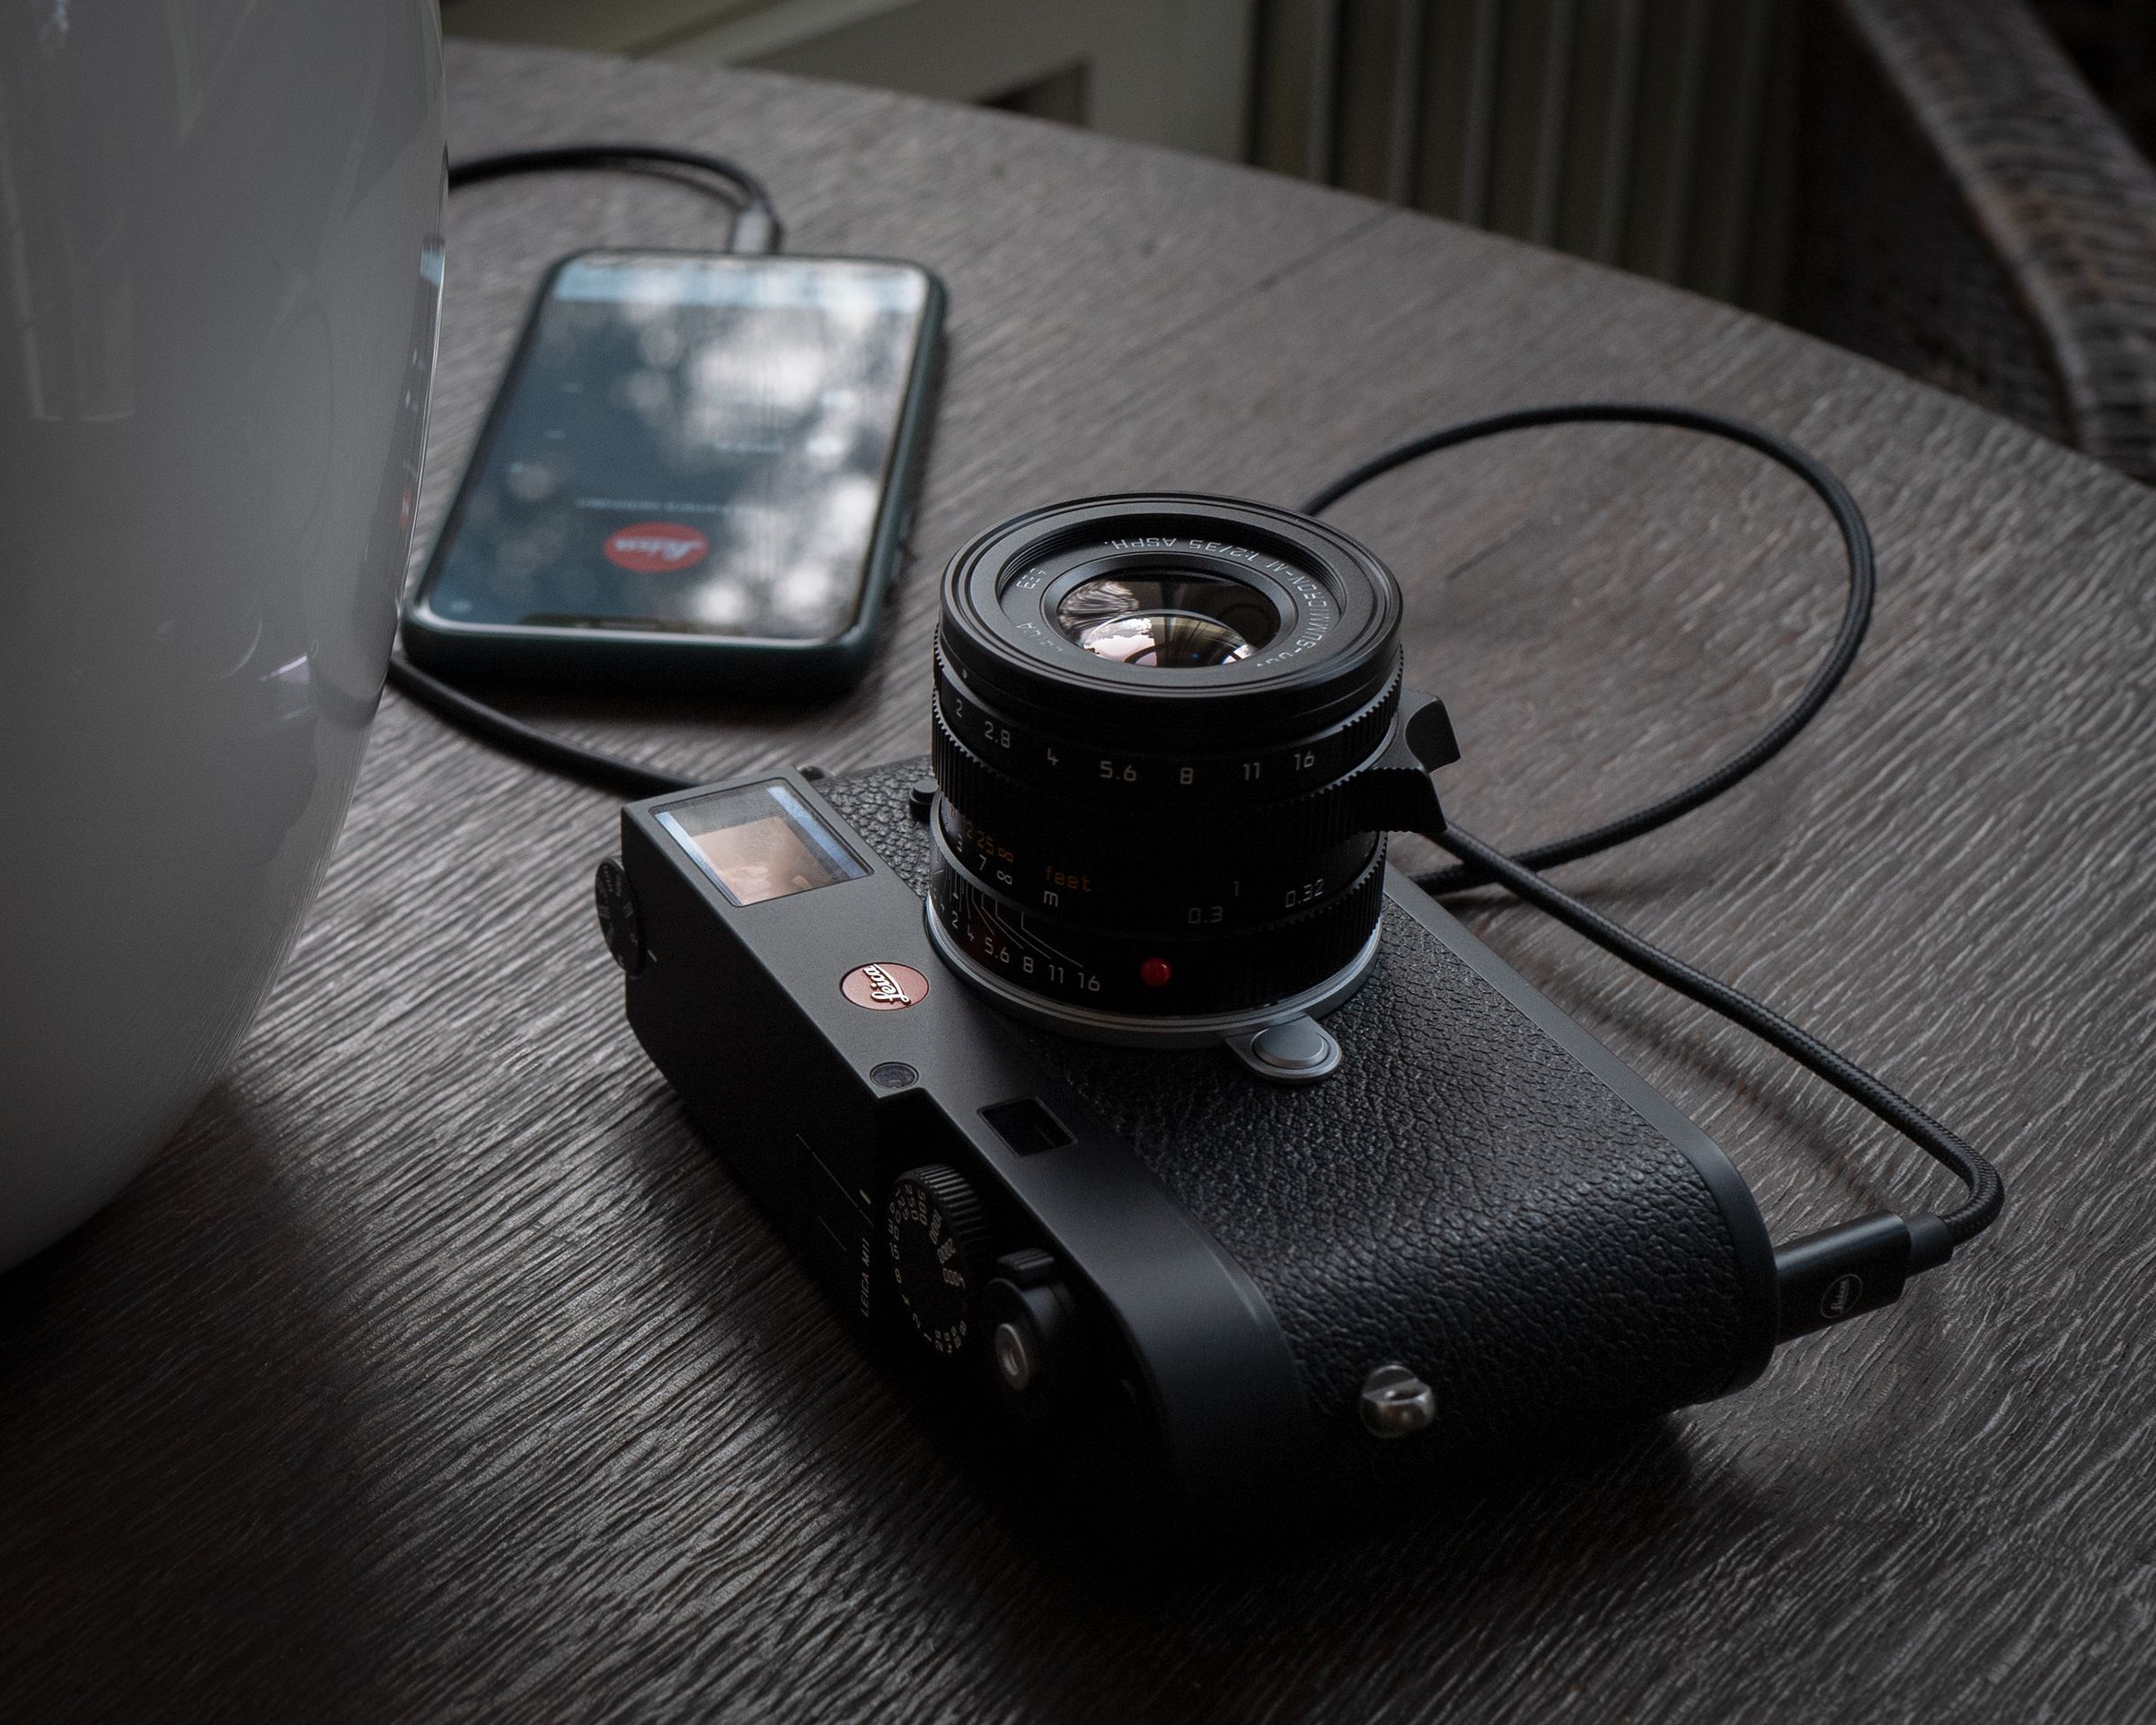 The M11 can connect directly to an iPhone and transfer images to it using Leica’s latest Fotos app.